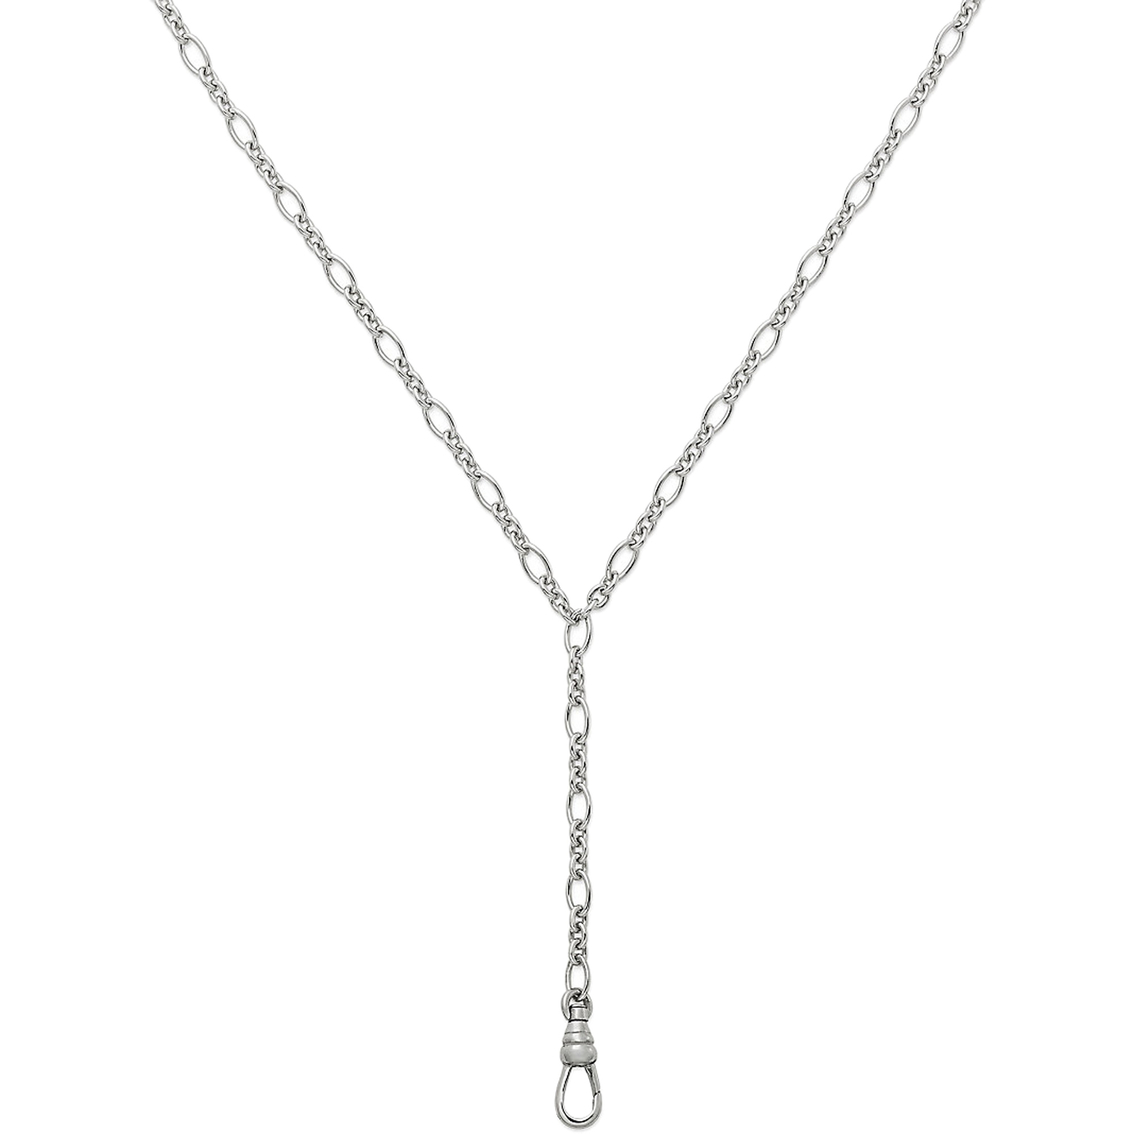 James Avery Hammered Changeable Charm Holder Necklace in Sterling Silver  30”